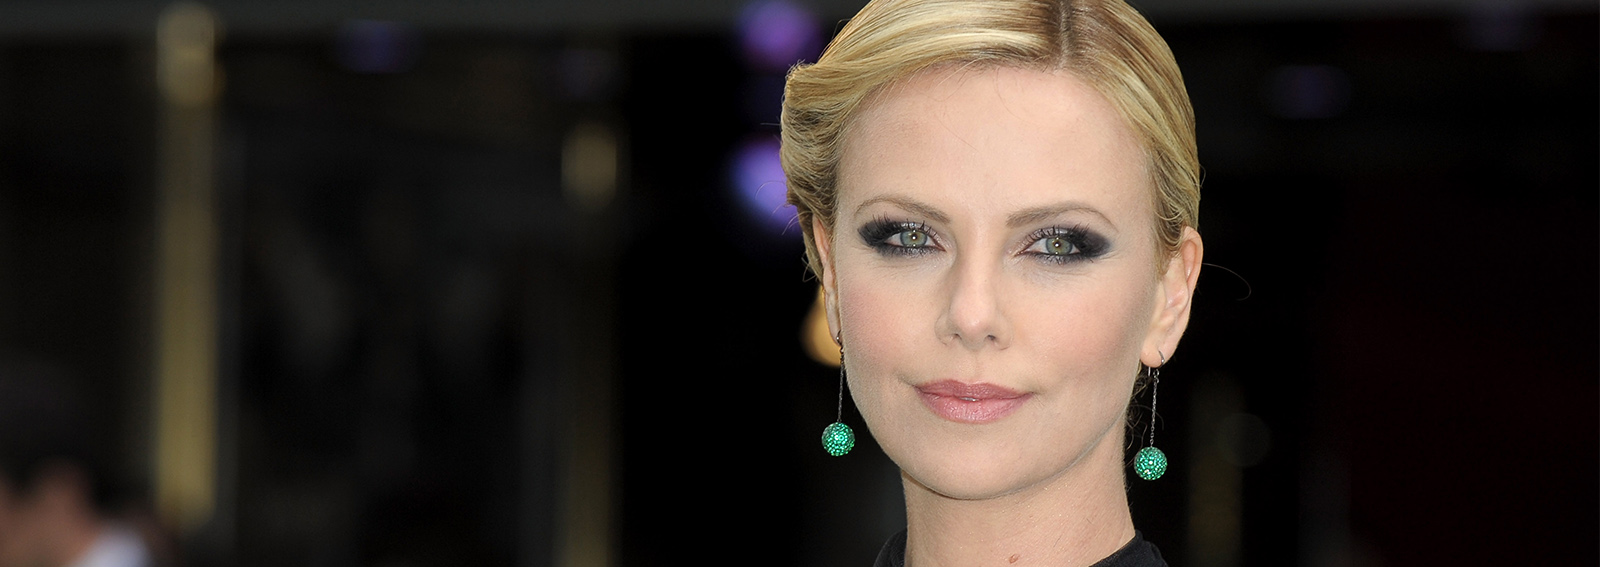 cover charlize theron ha nuovo amore desktop